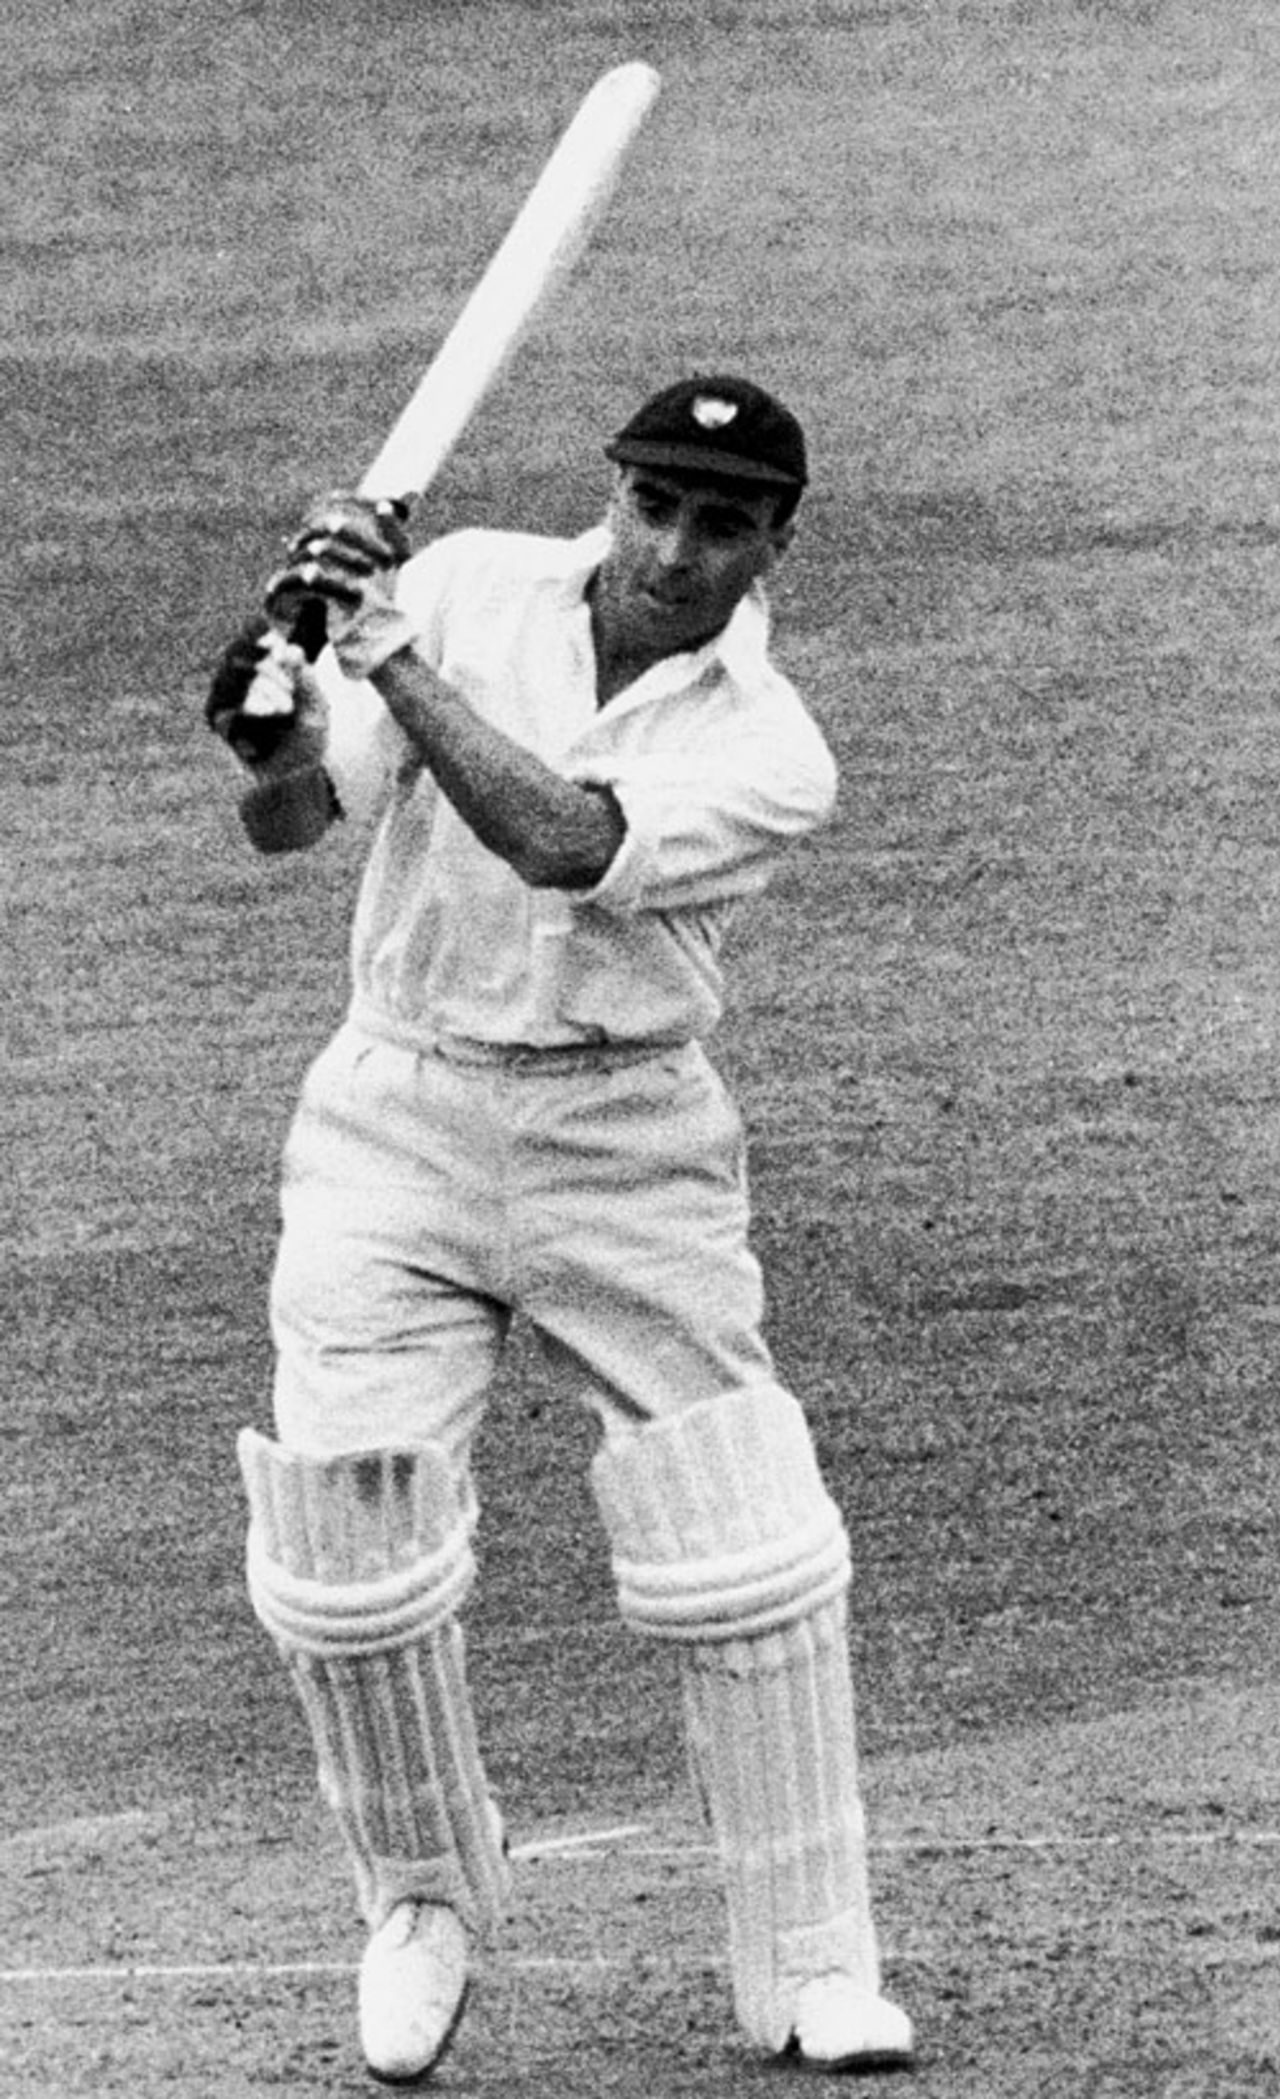 Jack Crapp bats during his unbeaten 99, Surrey v Gloucestershire, County Championship, 1st day, The Oval, June 11, 1949